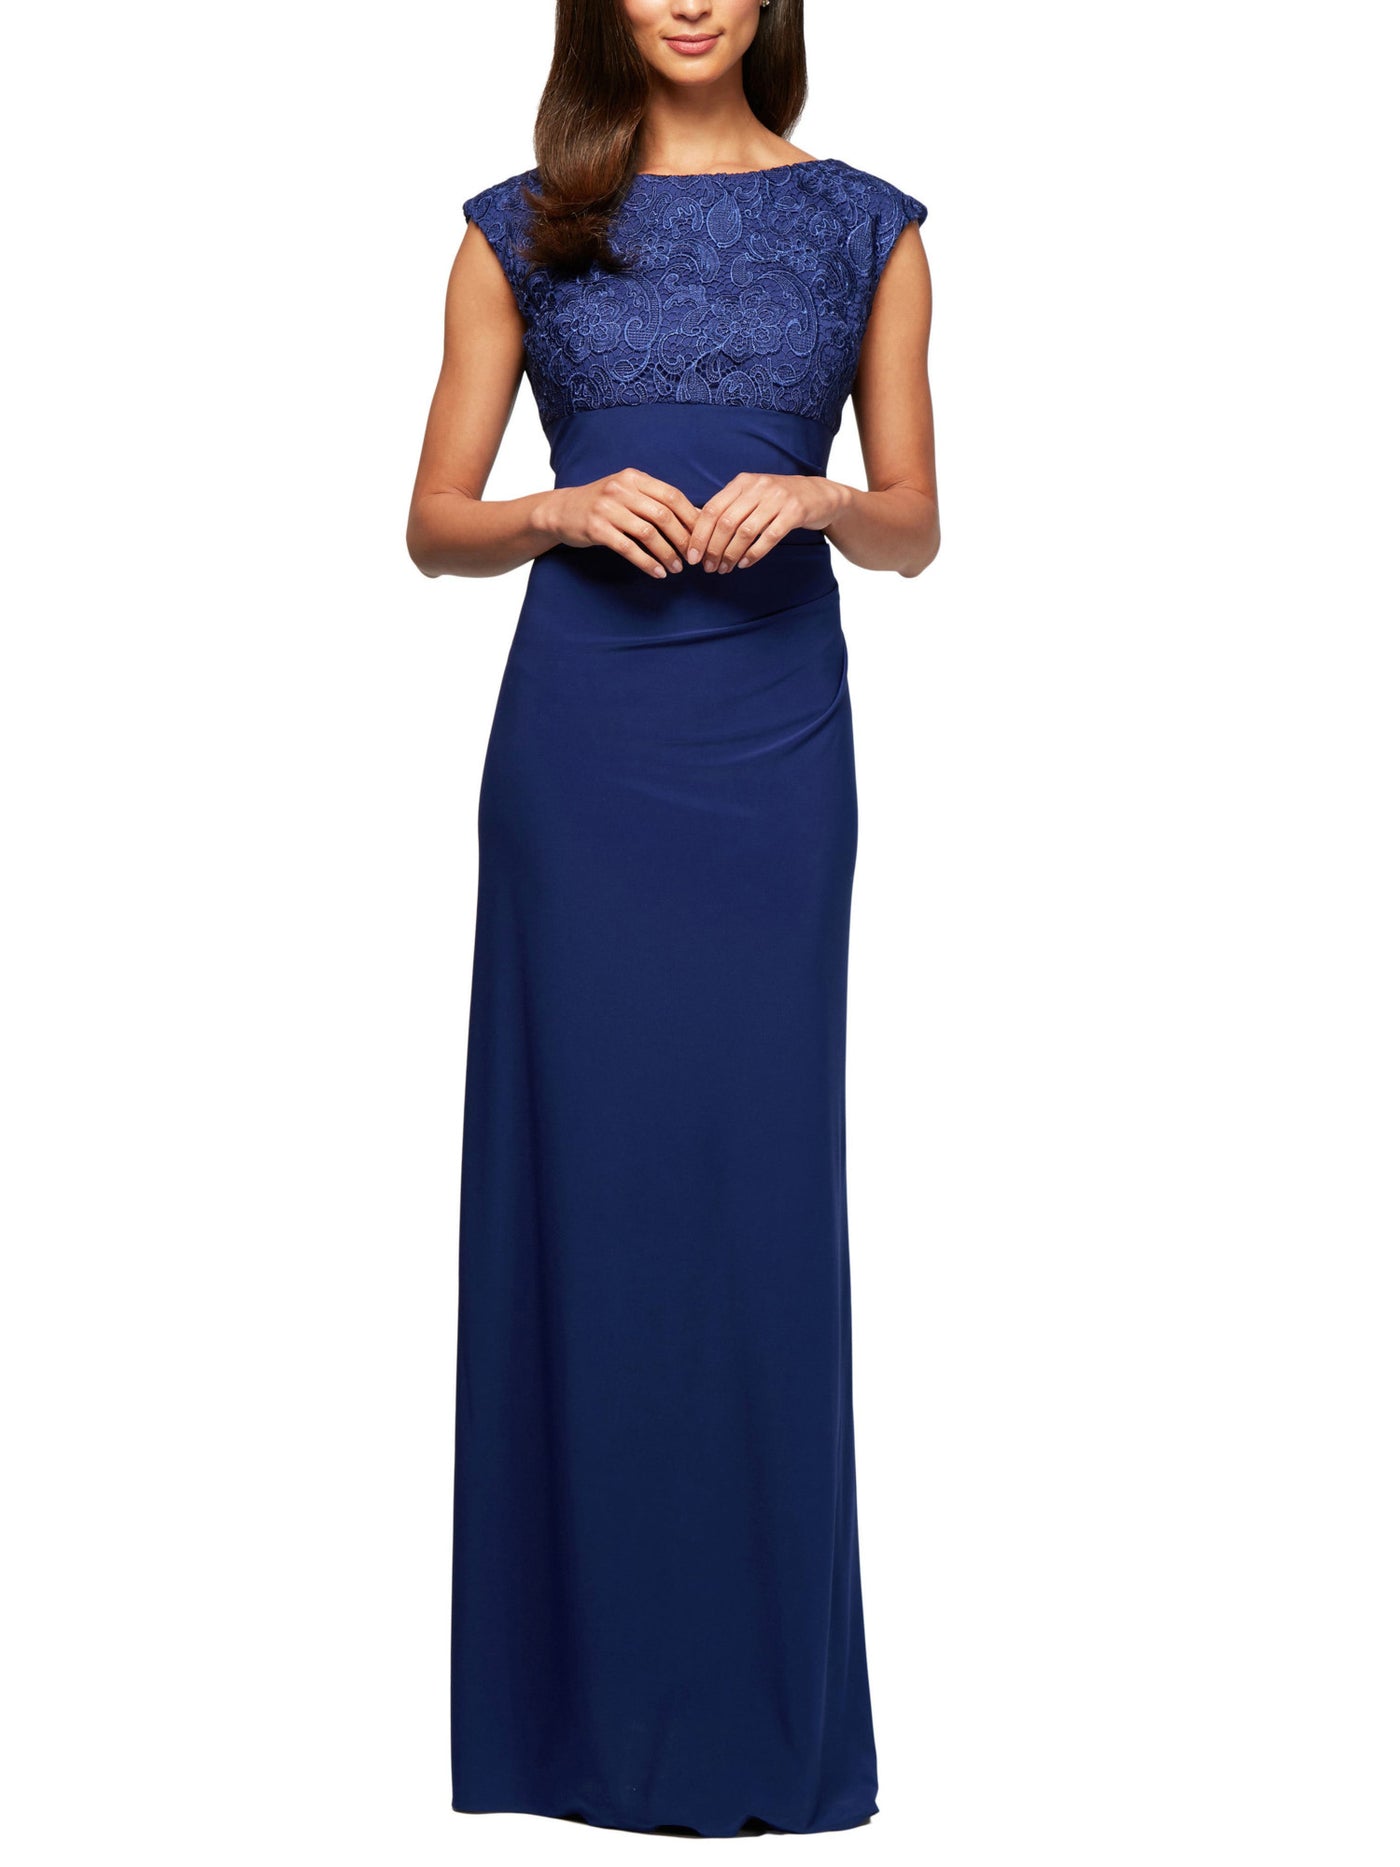 ALEX EVENINGS PETITE Womens Blue Stretch Zippered Ruched Column Cowl-back Gown Cap Sleeve Boat Neck Full-Length Formal Dress Petites 14P